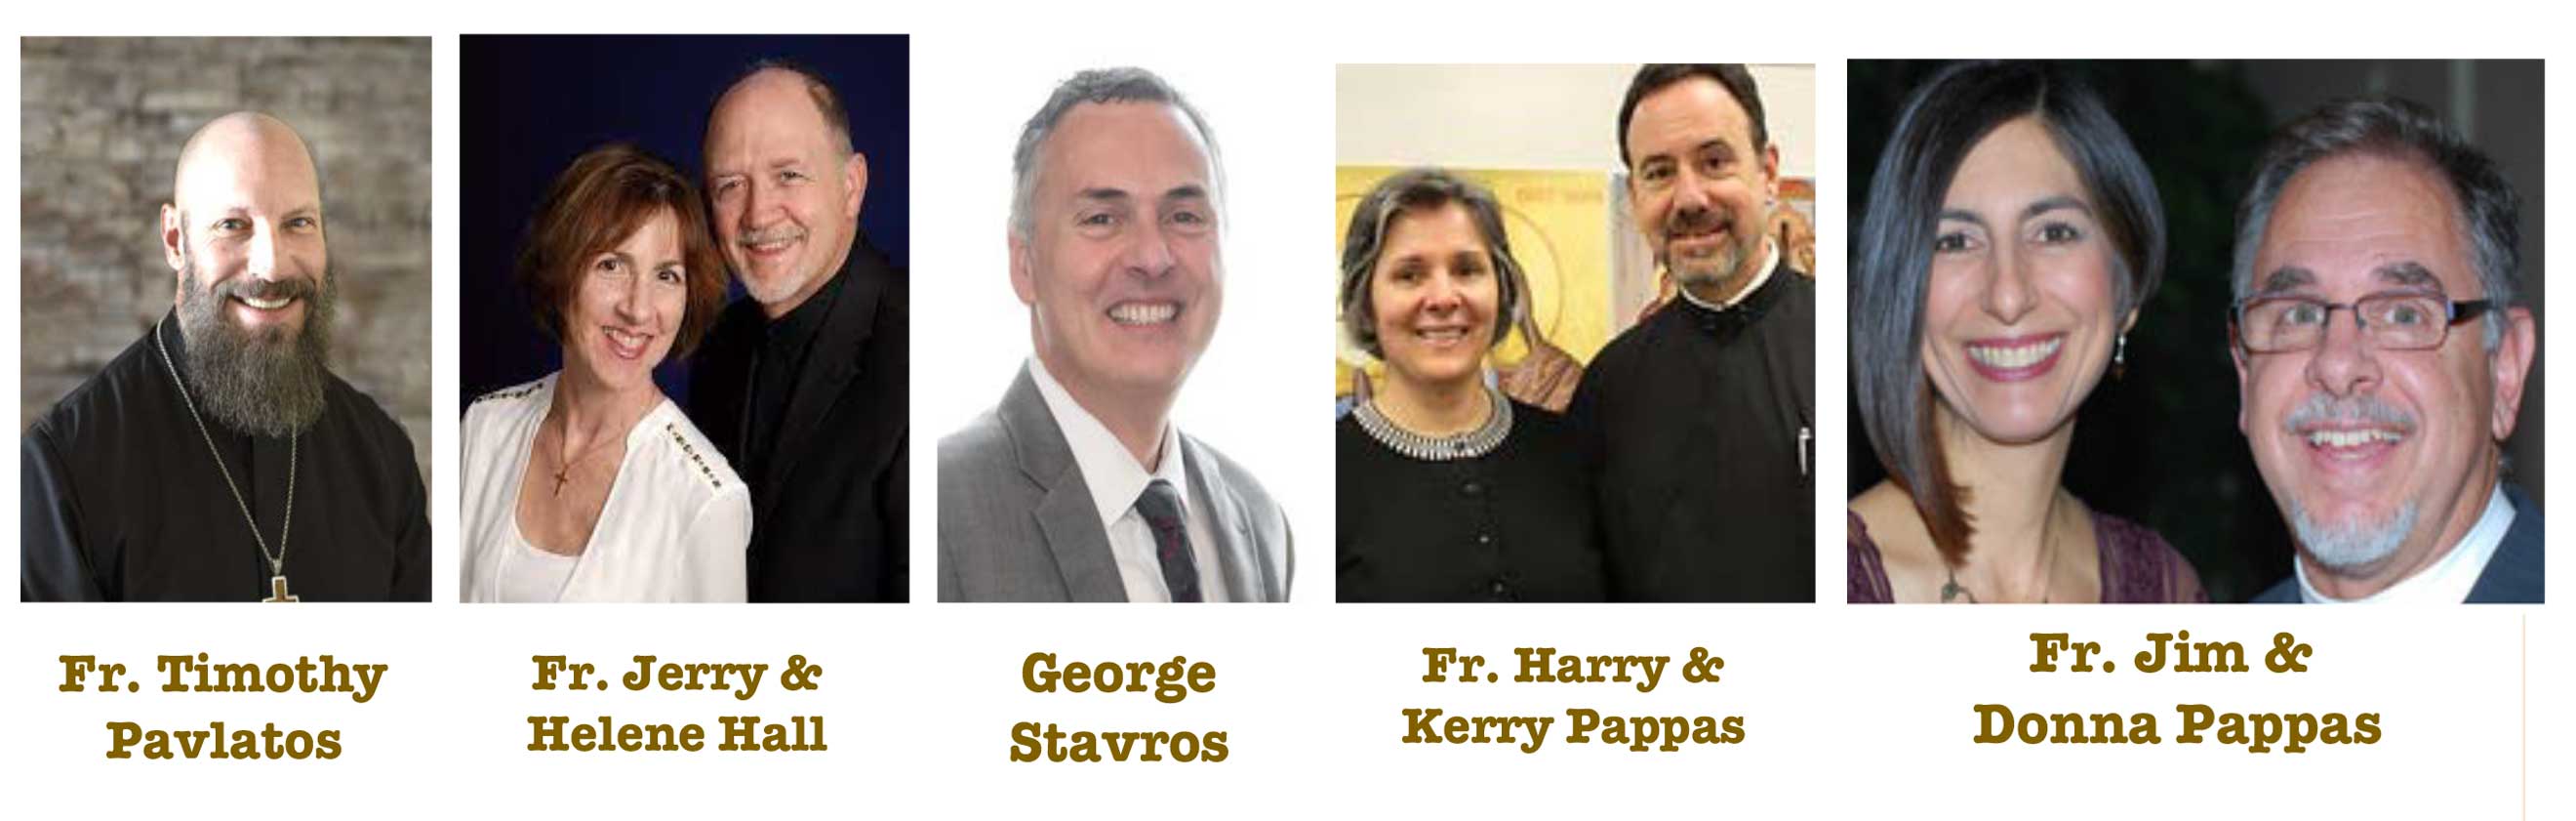 Speakers and Presenters for the Clergy Couples Retreat